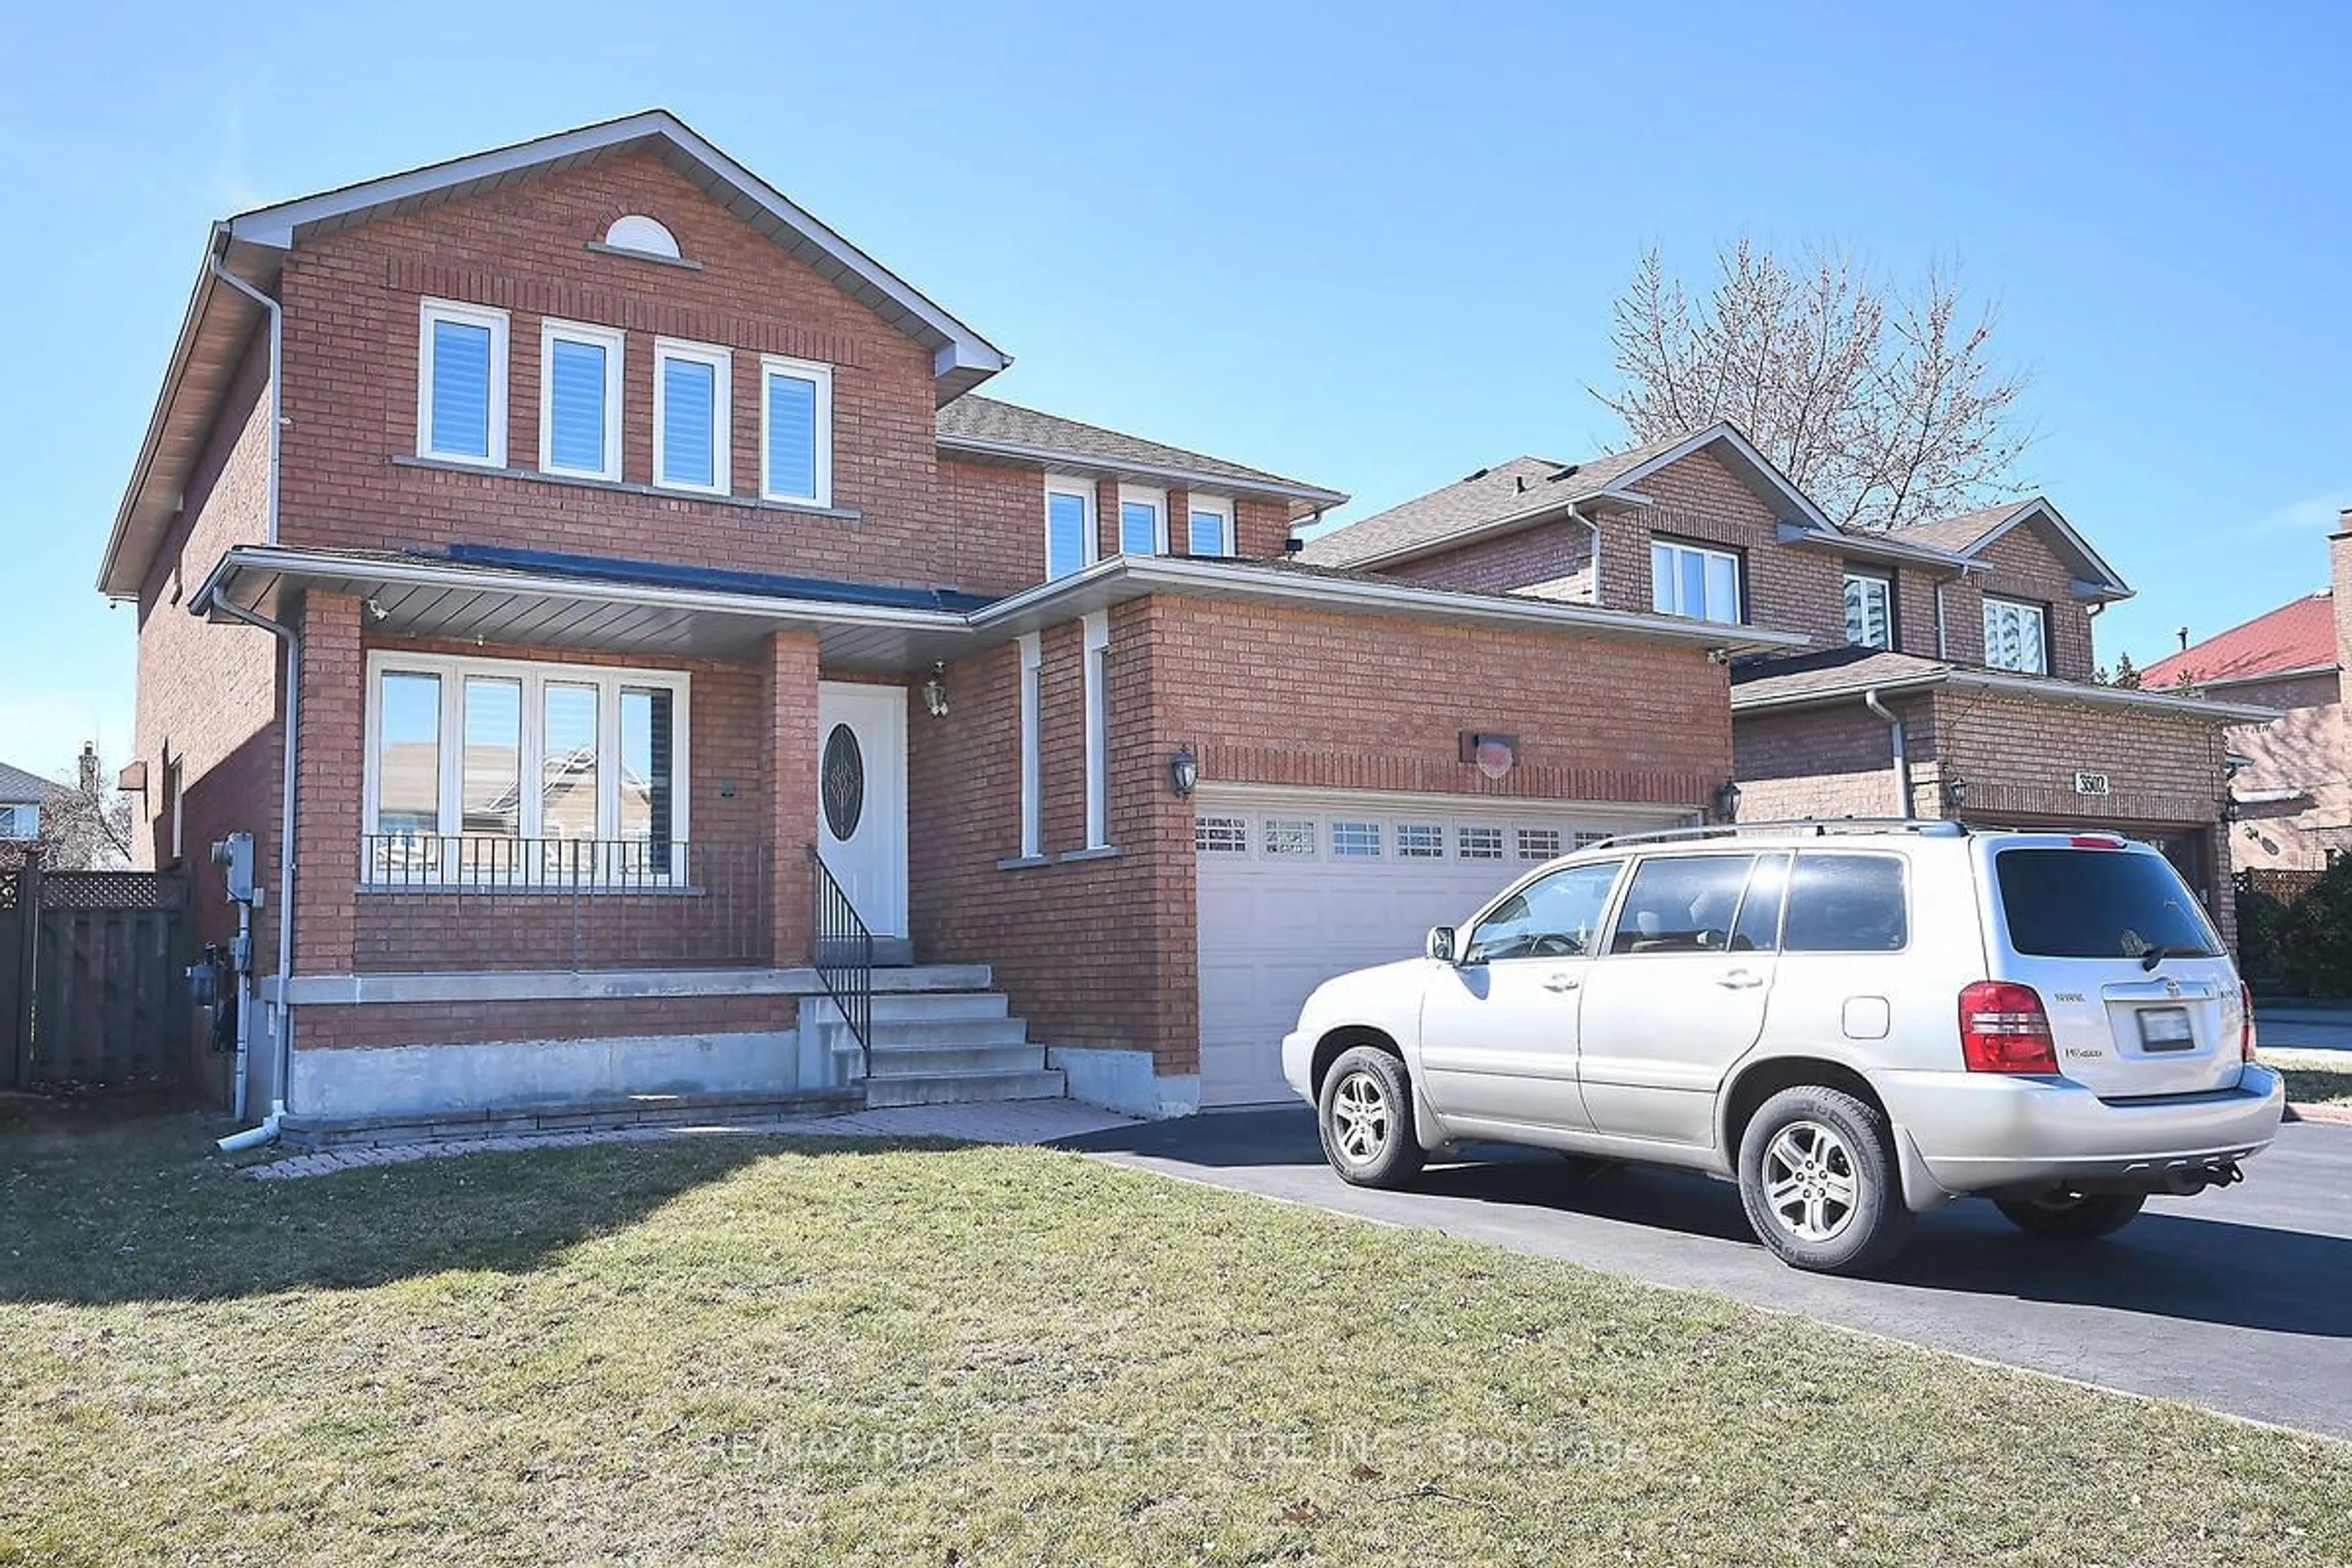 Home with brick exterior material for 3498 Redmond Rd, Mississauga Ontario L5B 3T2